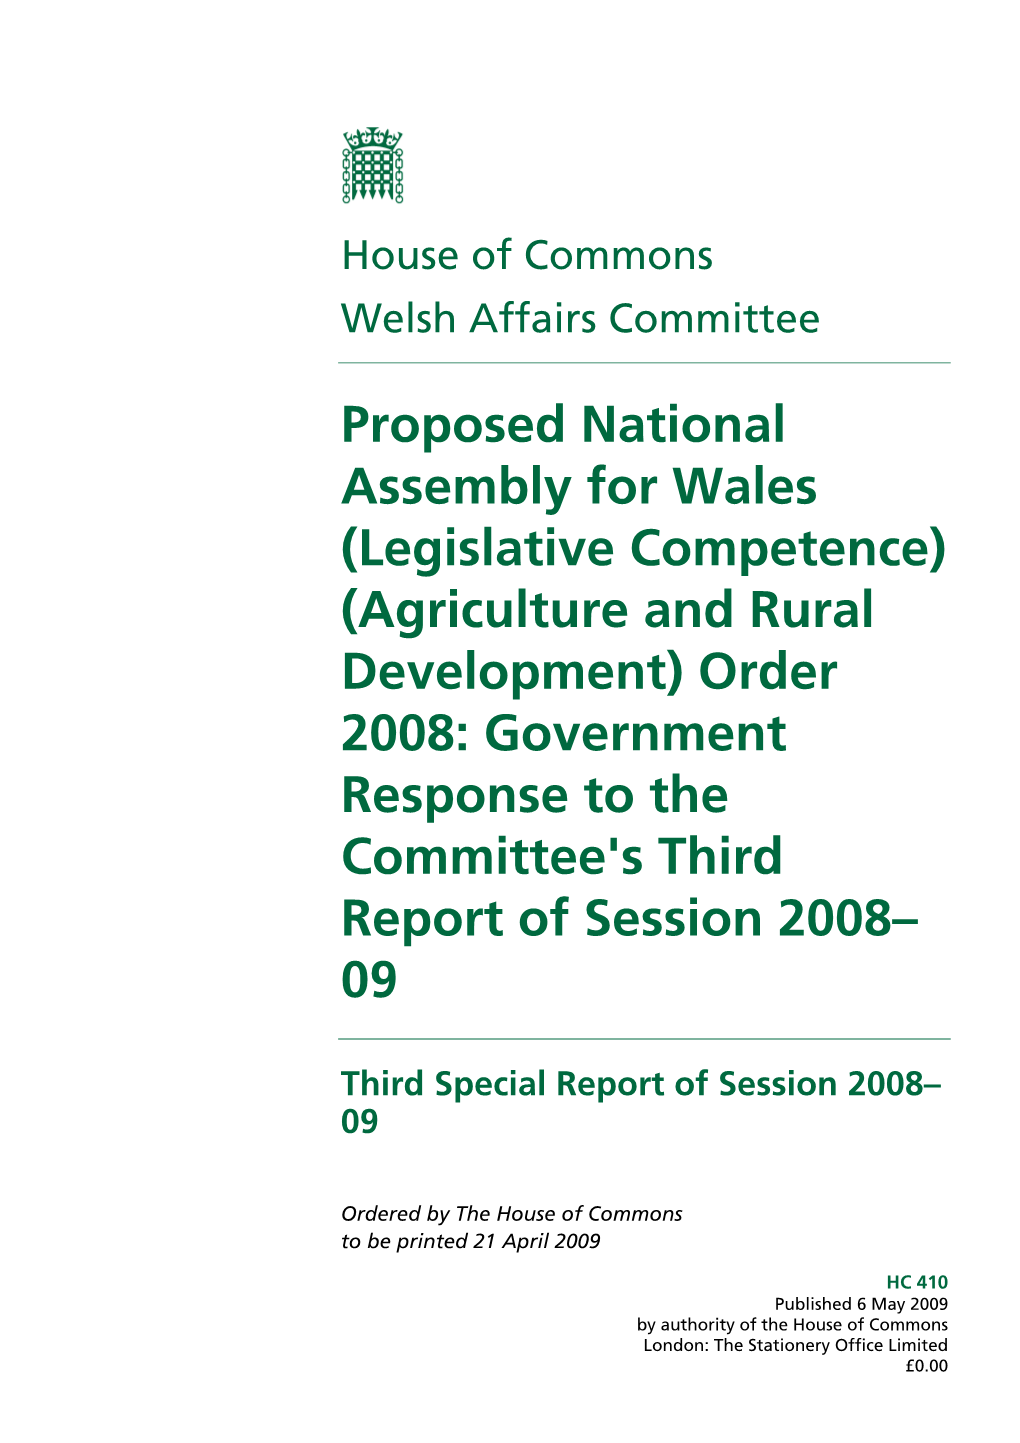 Proposed National Assembly for Wales (Legislative Competence